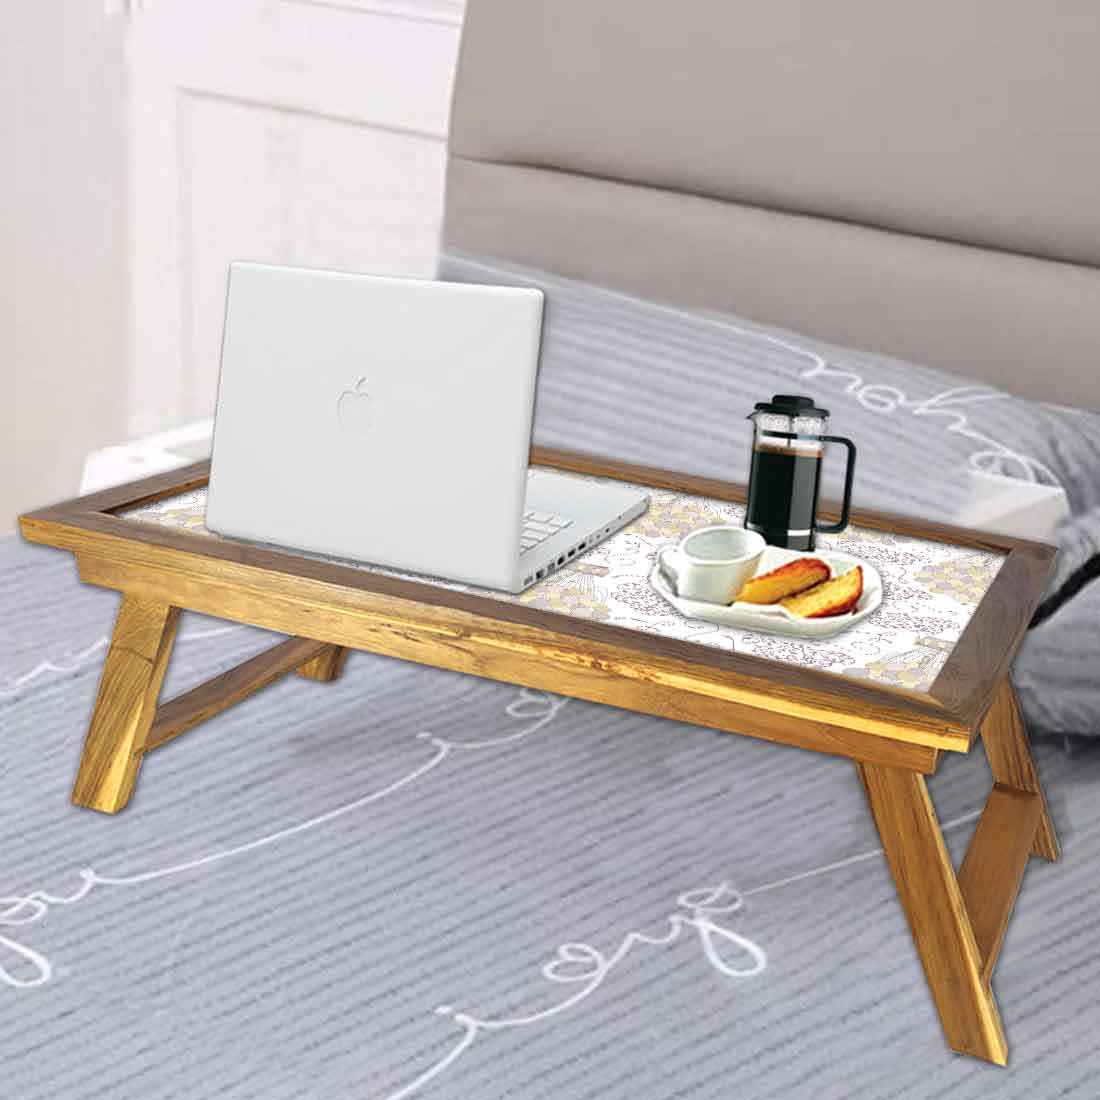 Nutcase Folding Laptop Table For Home Bed Lapdesk Breakfast Table Foldable Teak Wooden Study Desk - Air Balloon Nutcase